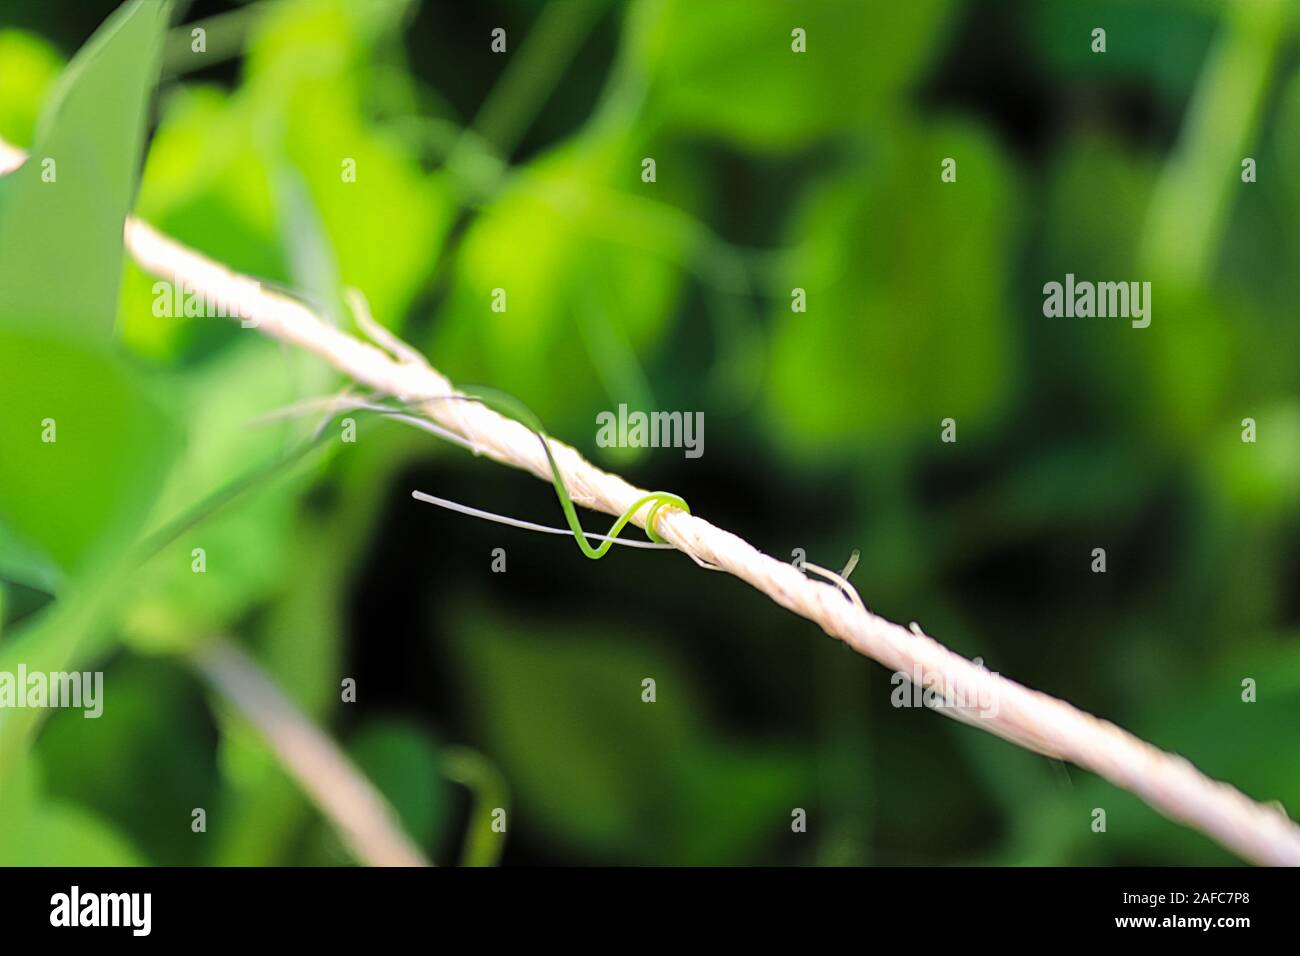 A pea vine curling around a string Stock Photo